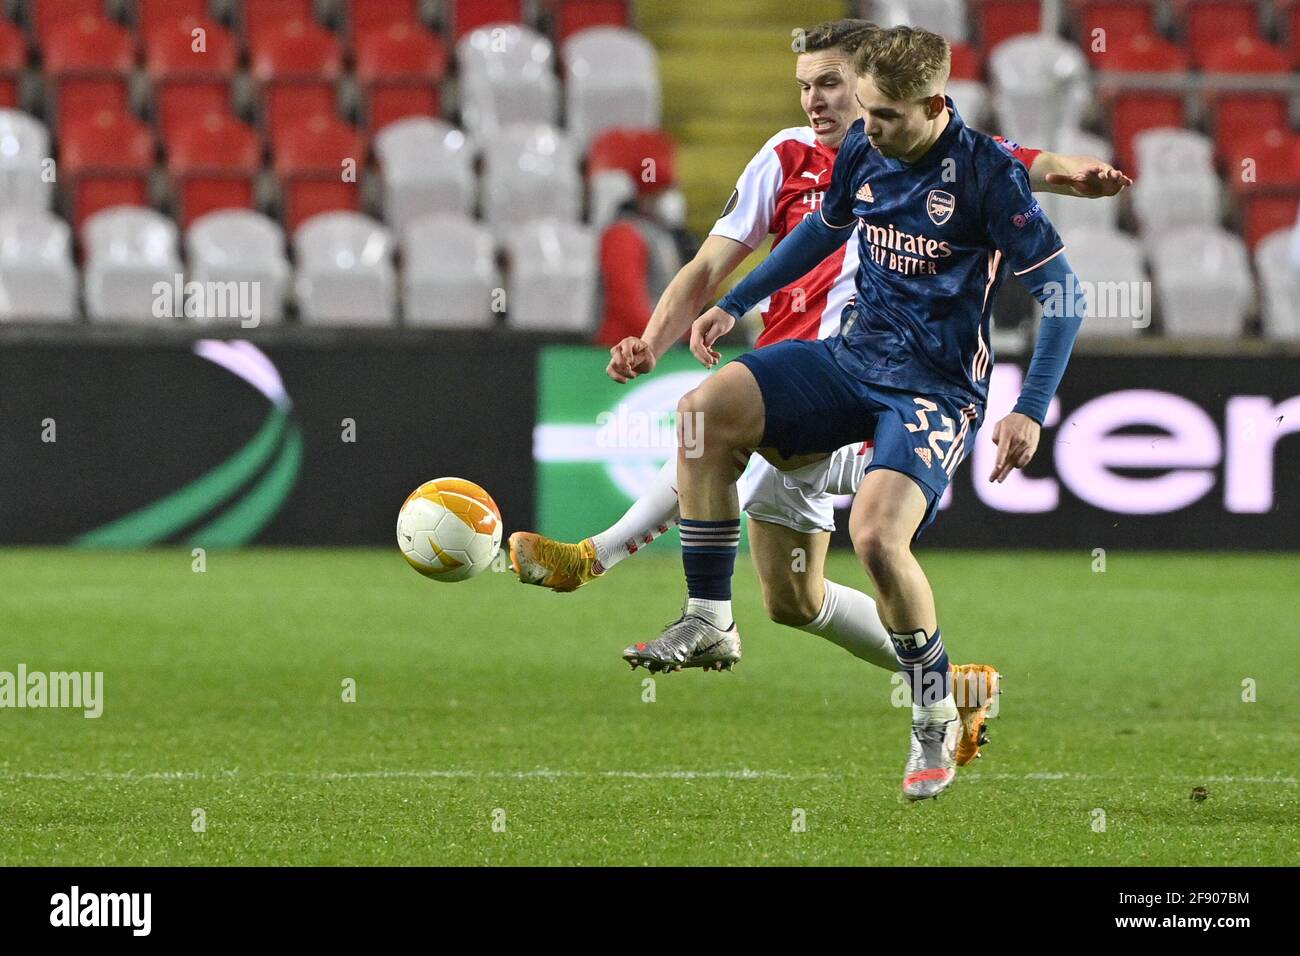 Prague, Cr. 15th Apr, 2021. From left Lukas Provod of Slavia and Emile Smith Rowe of Arsenal in action during the FC European Football League quarterfinal match SK Slavia Prague vs Arsenal in Prague, Czech Republic, April 15, 2021. Credit: Vit Simanek/CTK Photo/Alamy Live News Stock Photo